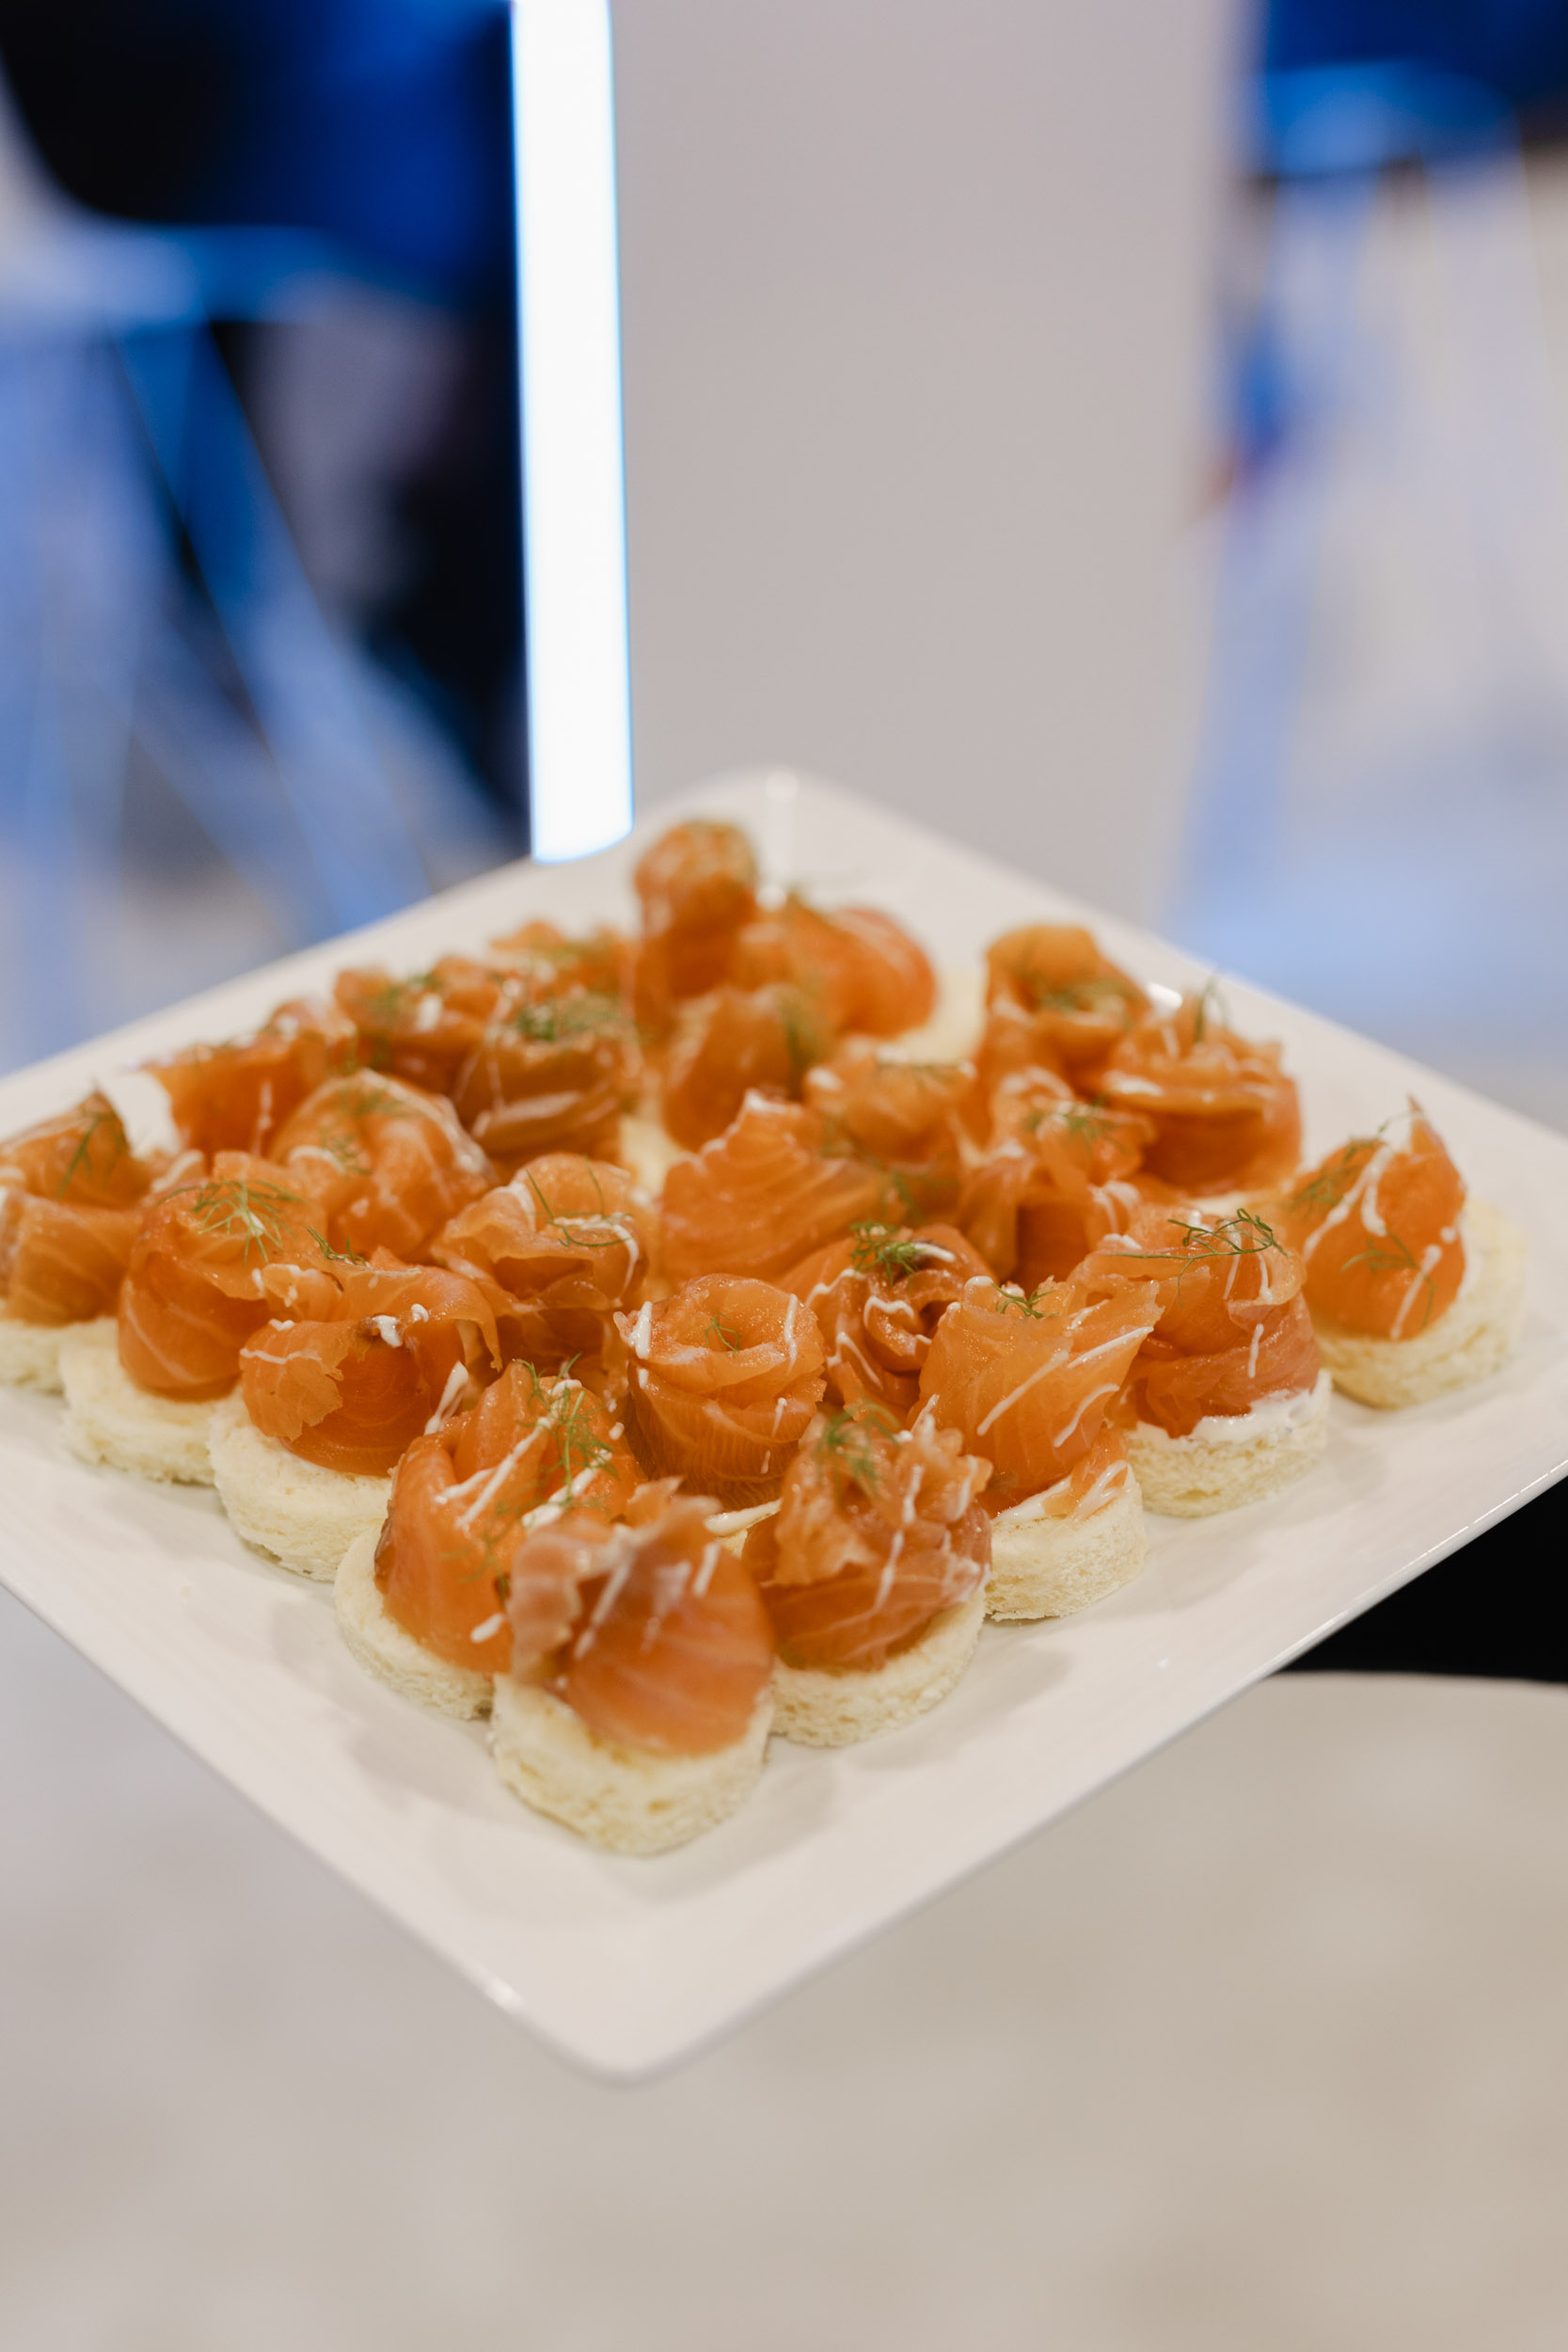 A person is holding a plate of food at a Toronto trade show.